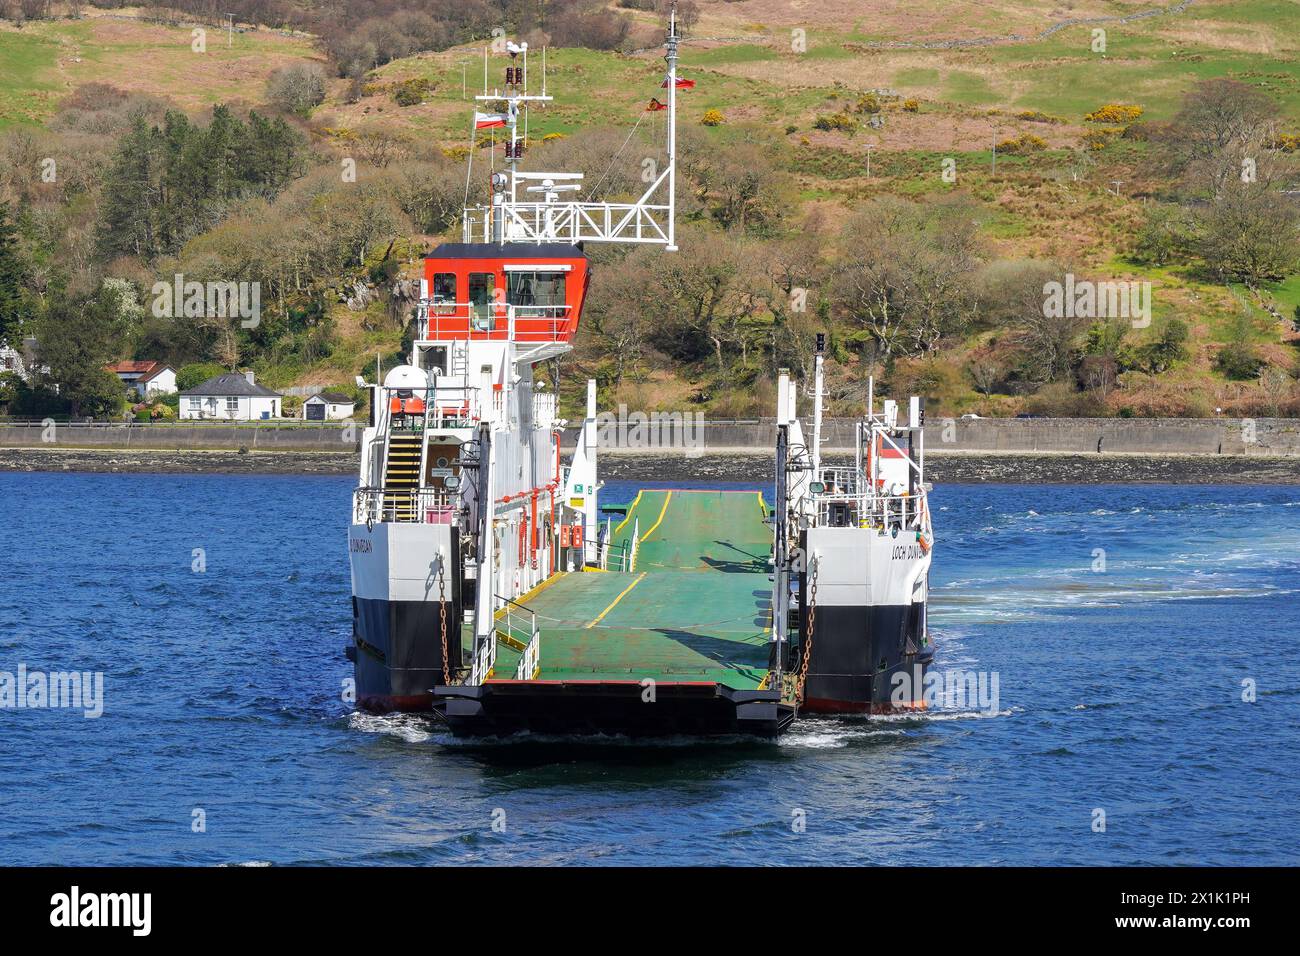 MV Loch Dunvegan, small Ro-Ro ferry operated by Caledonian MacBrayne, entered service on 13 May 1991. Stock Photo